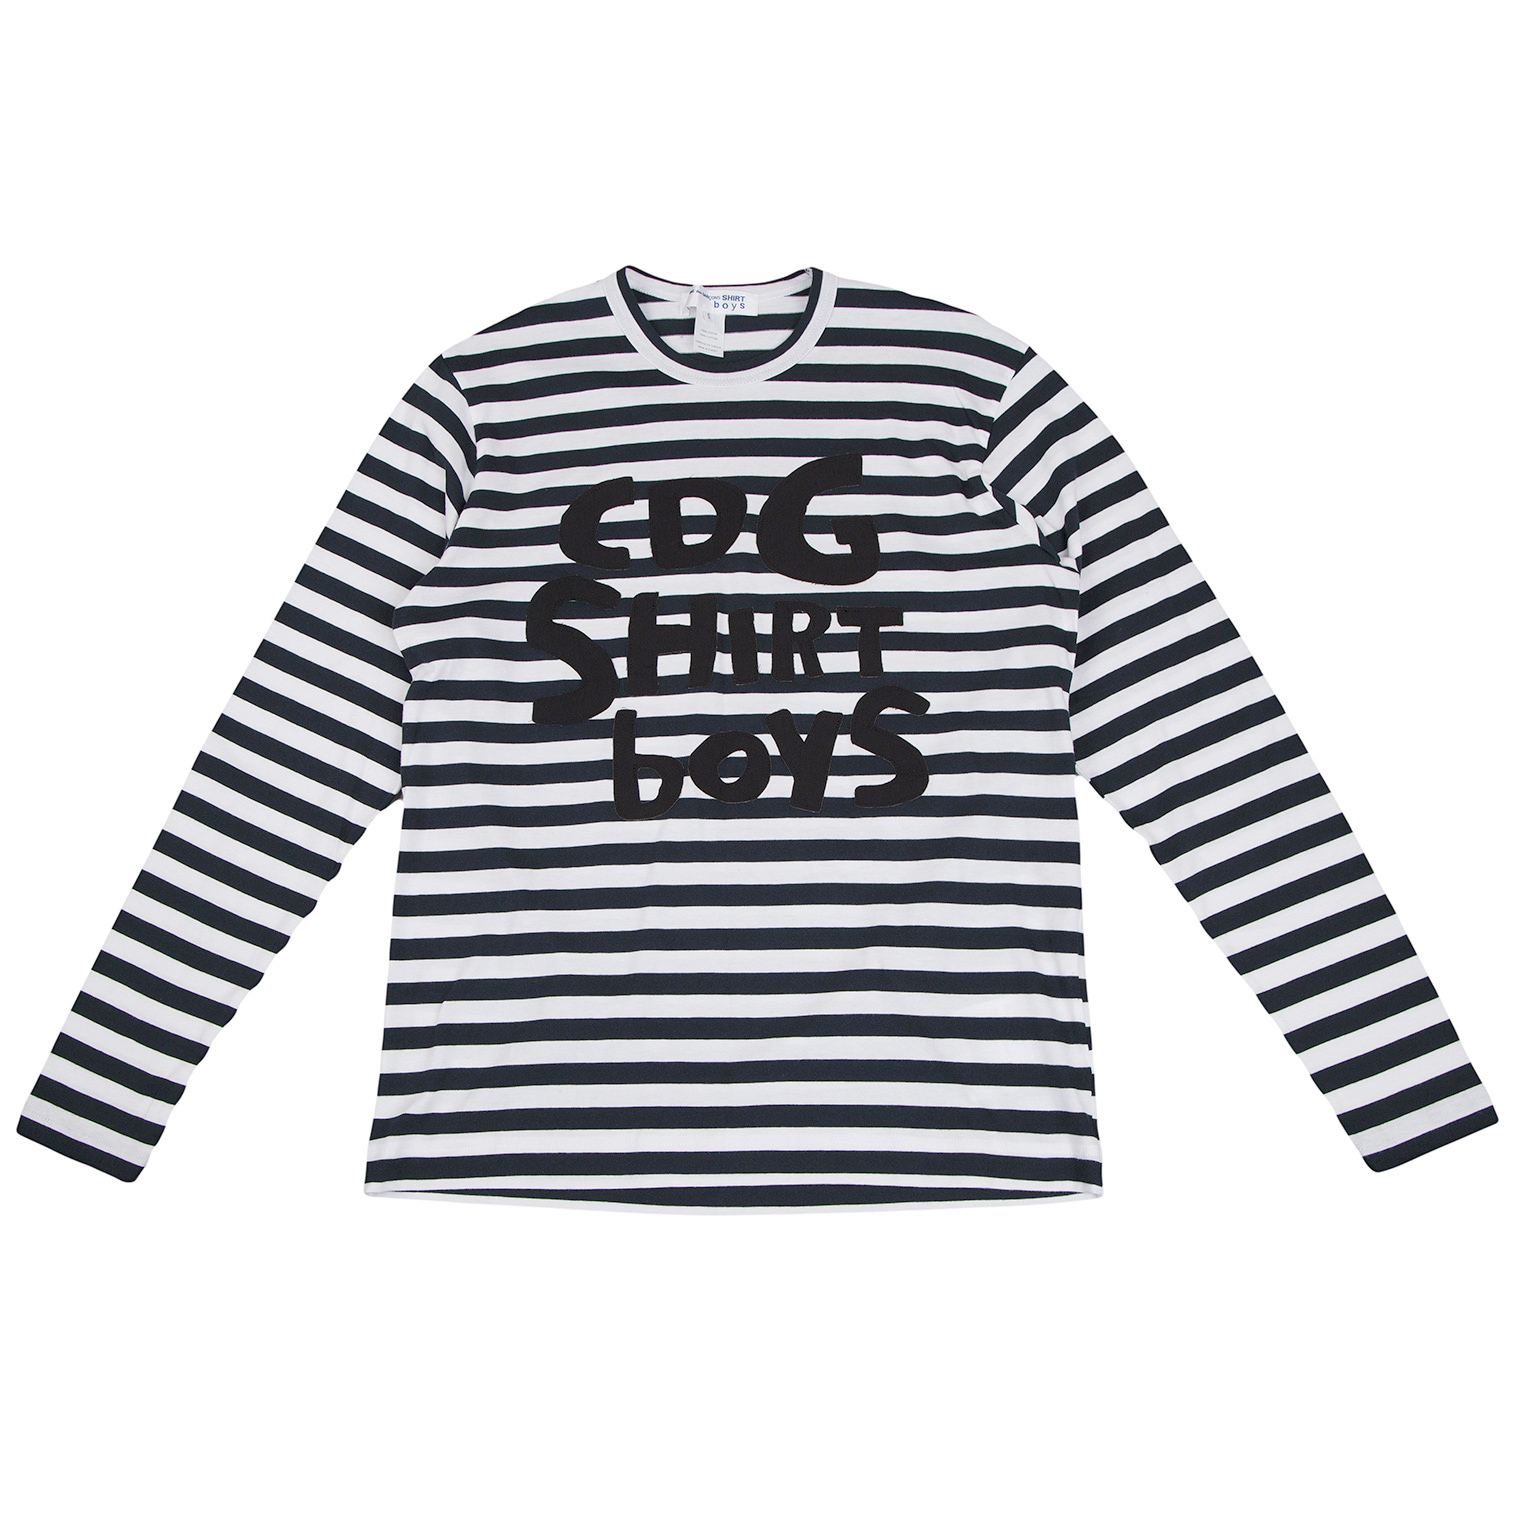 COMME des GARCONS SHIRT Tシャツ・カットソー Sあり光沢